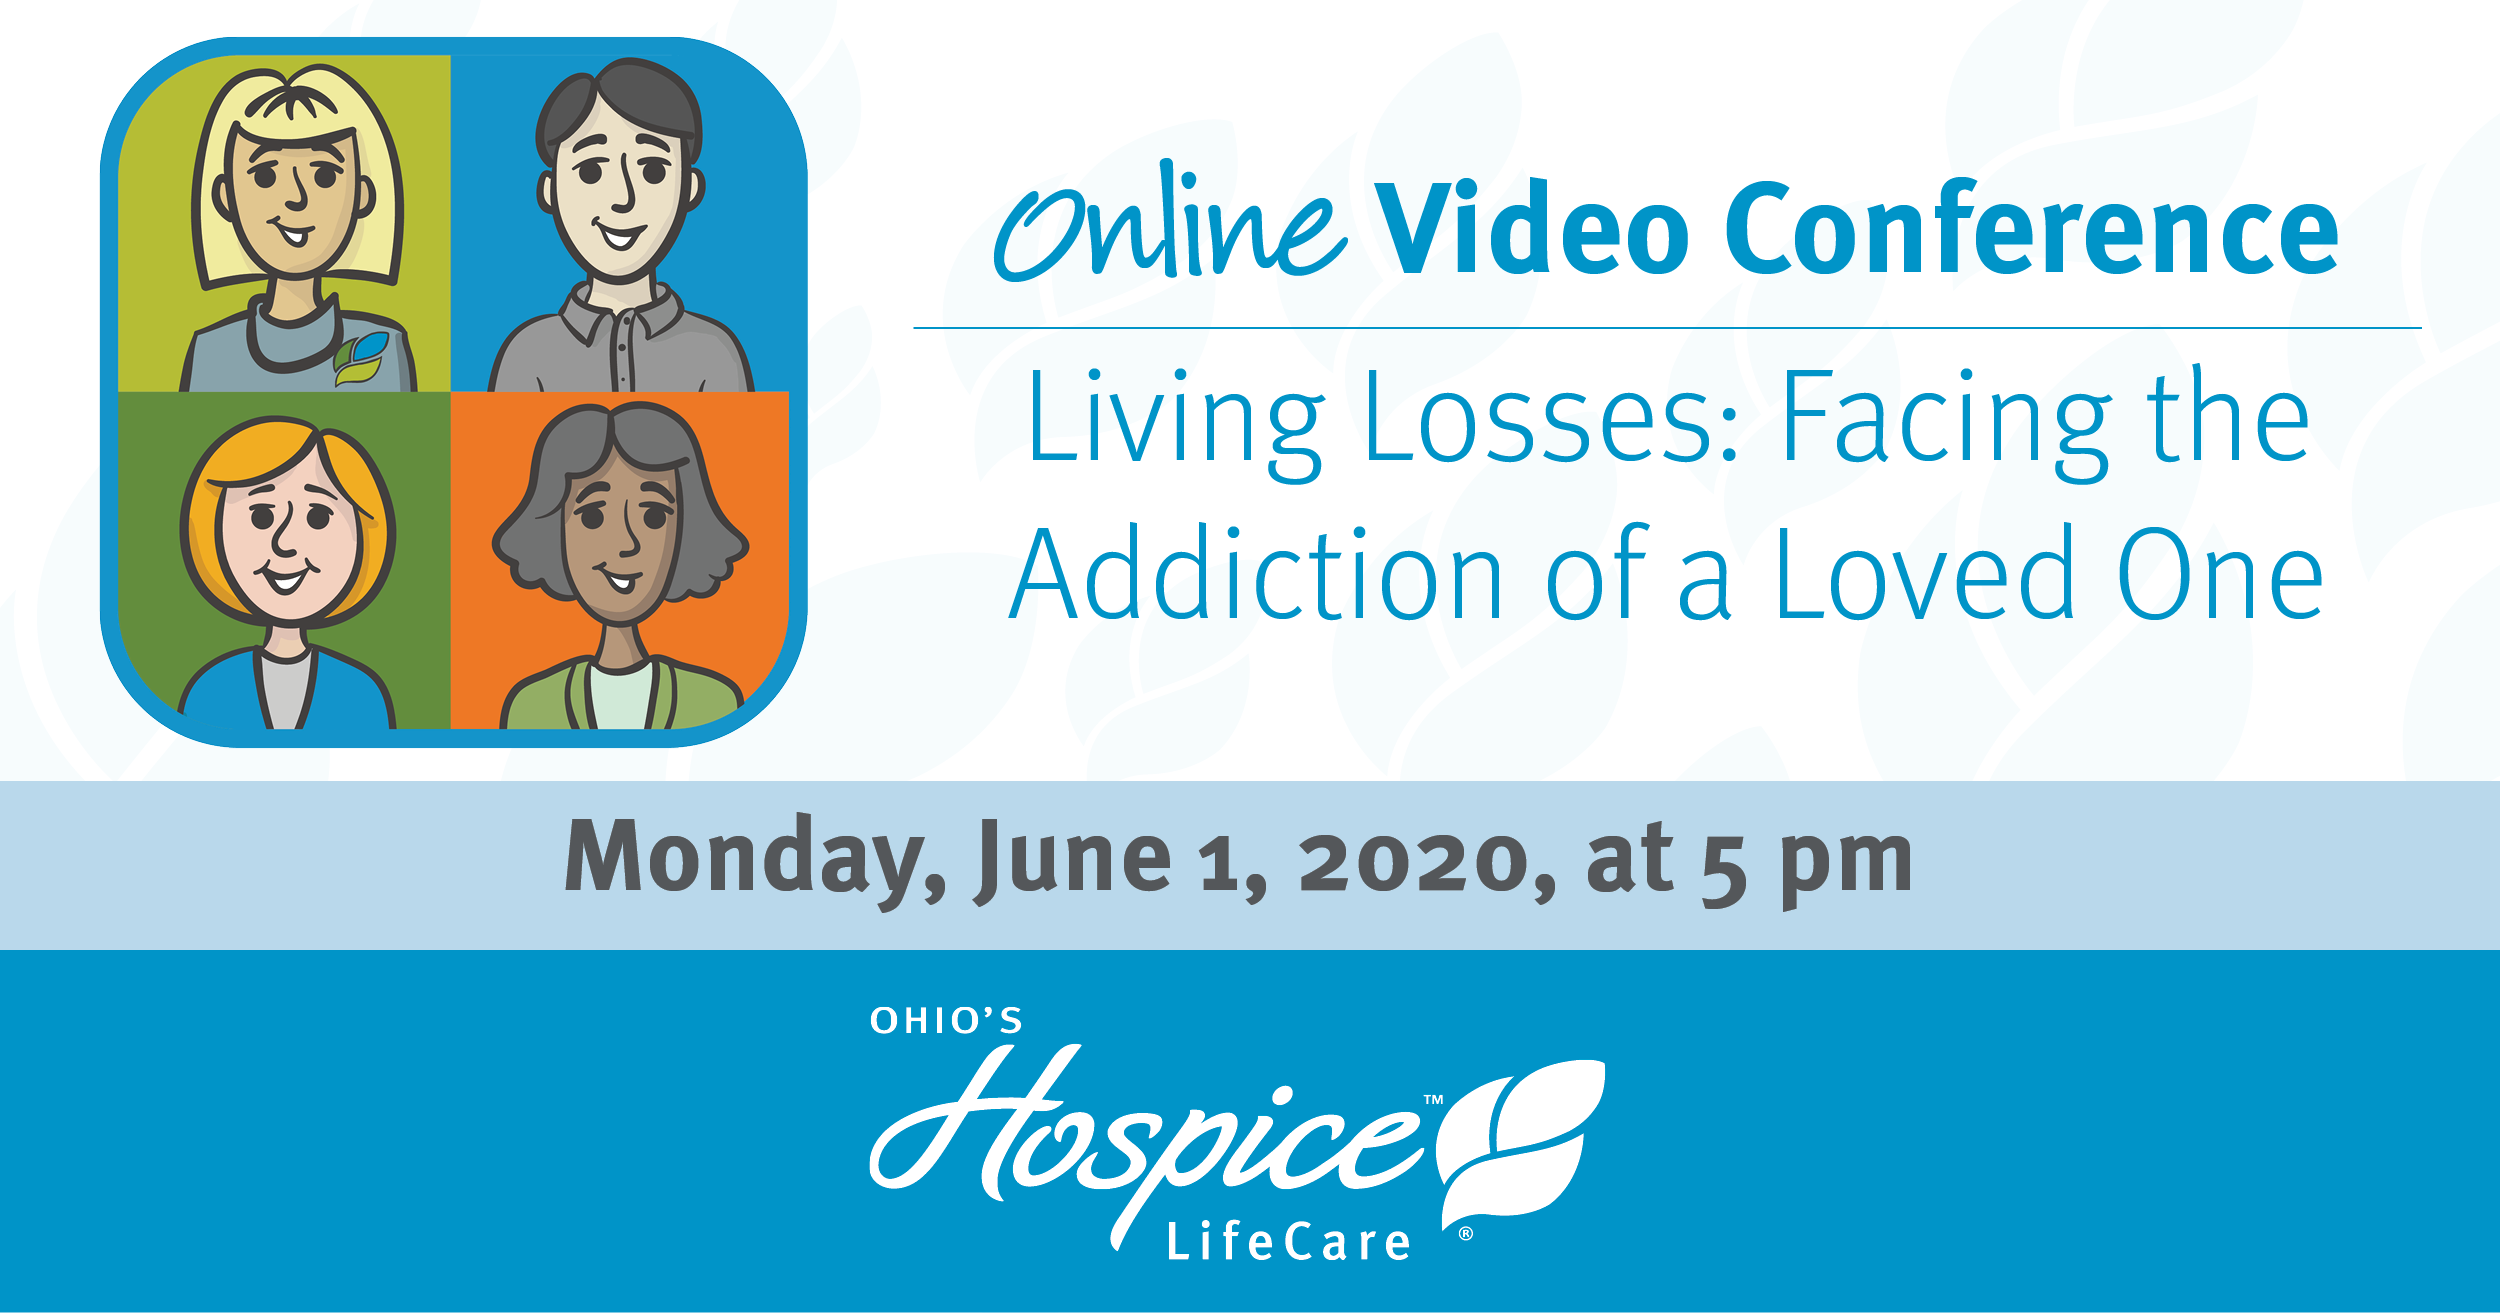 Online Video Conference: Living Losses: Facing the Addiction of a Loved One